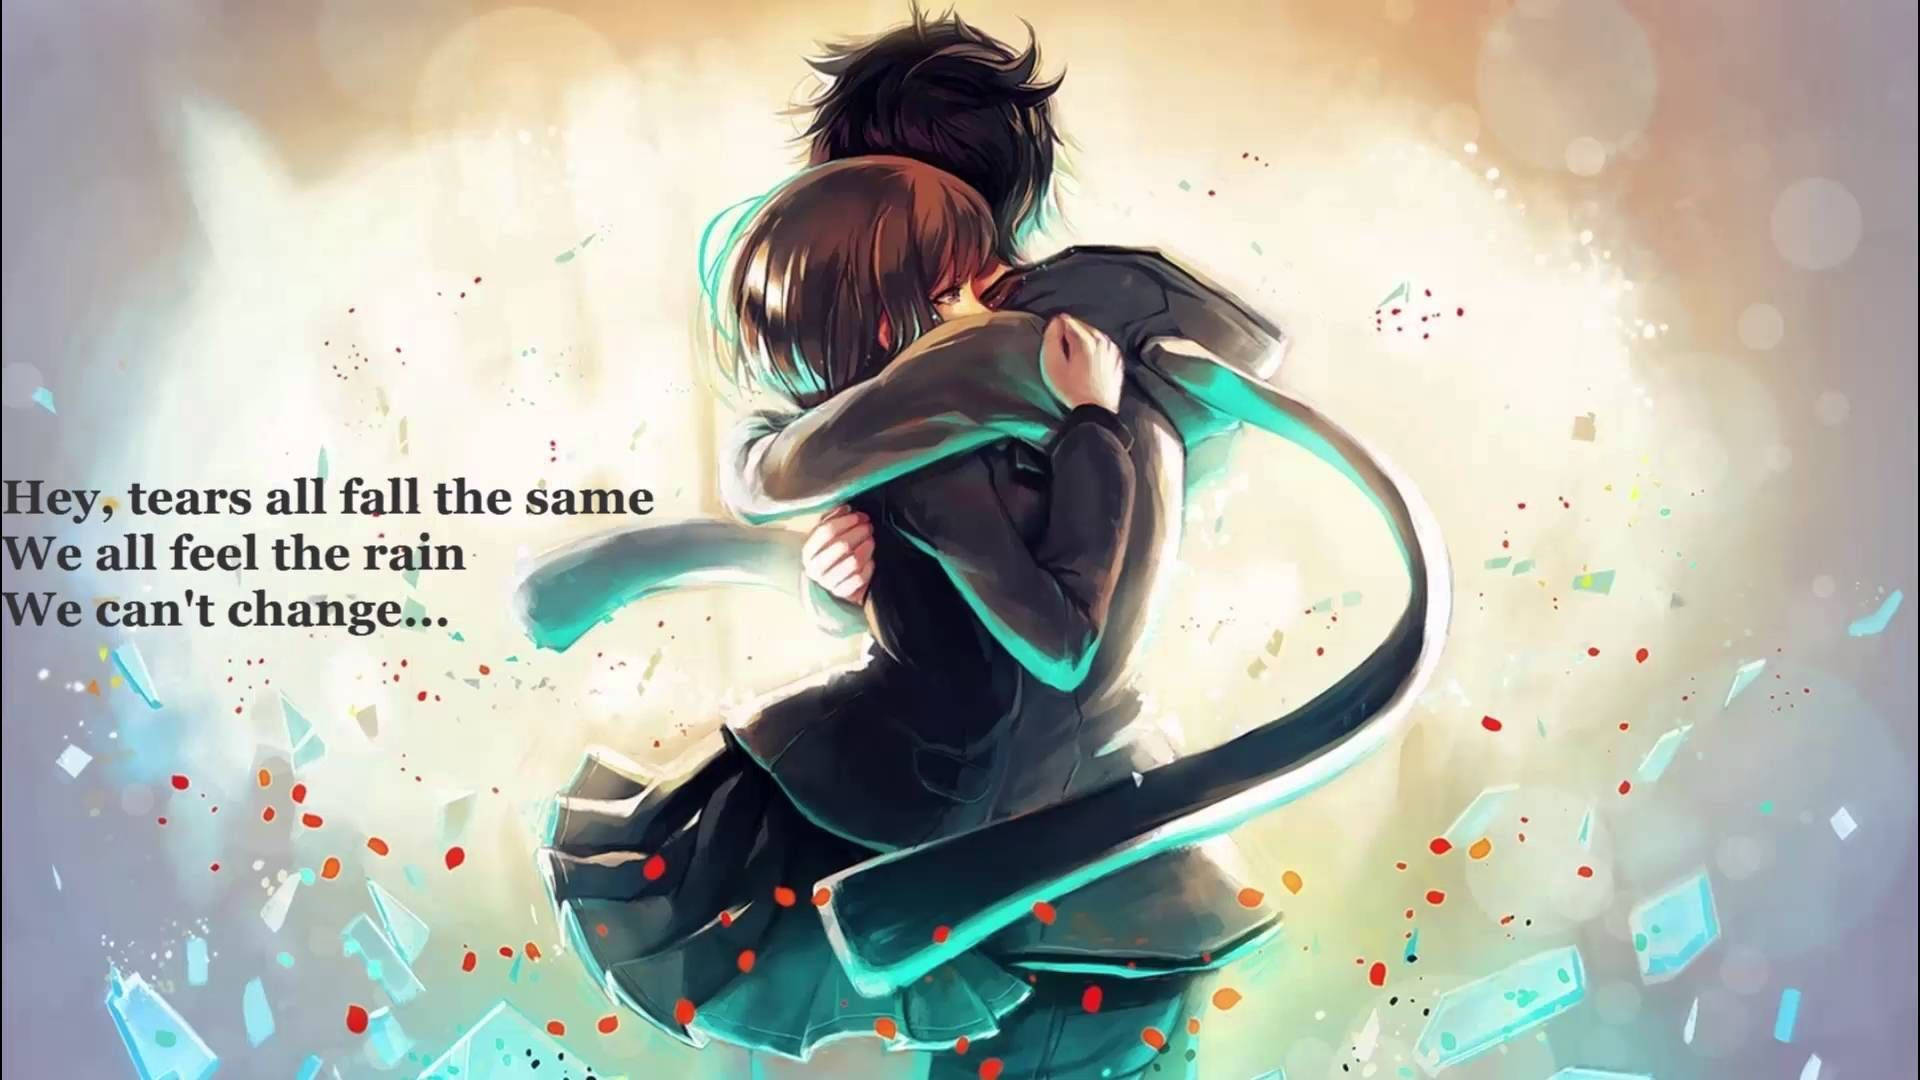 Anime Couple Hug With Quote Wallpaper